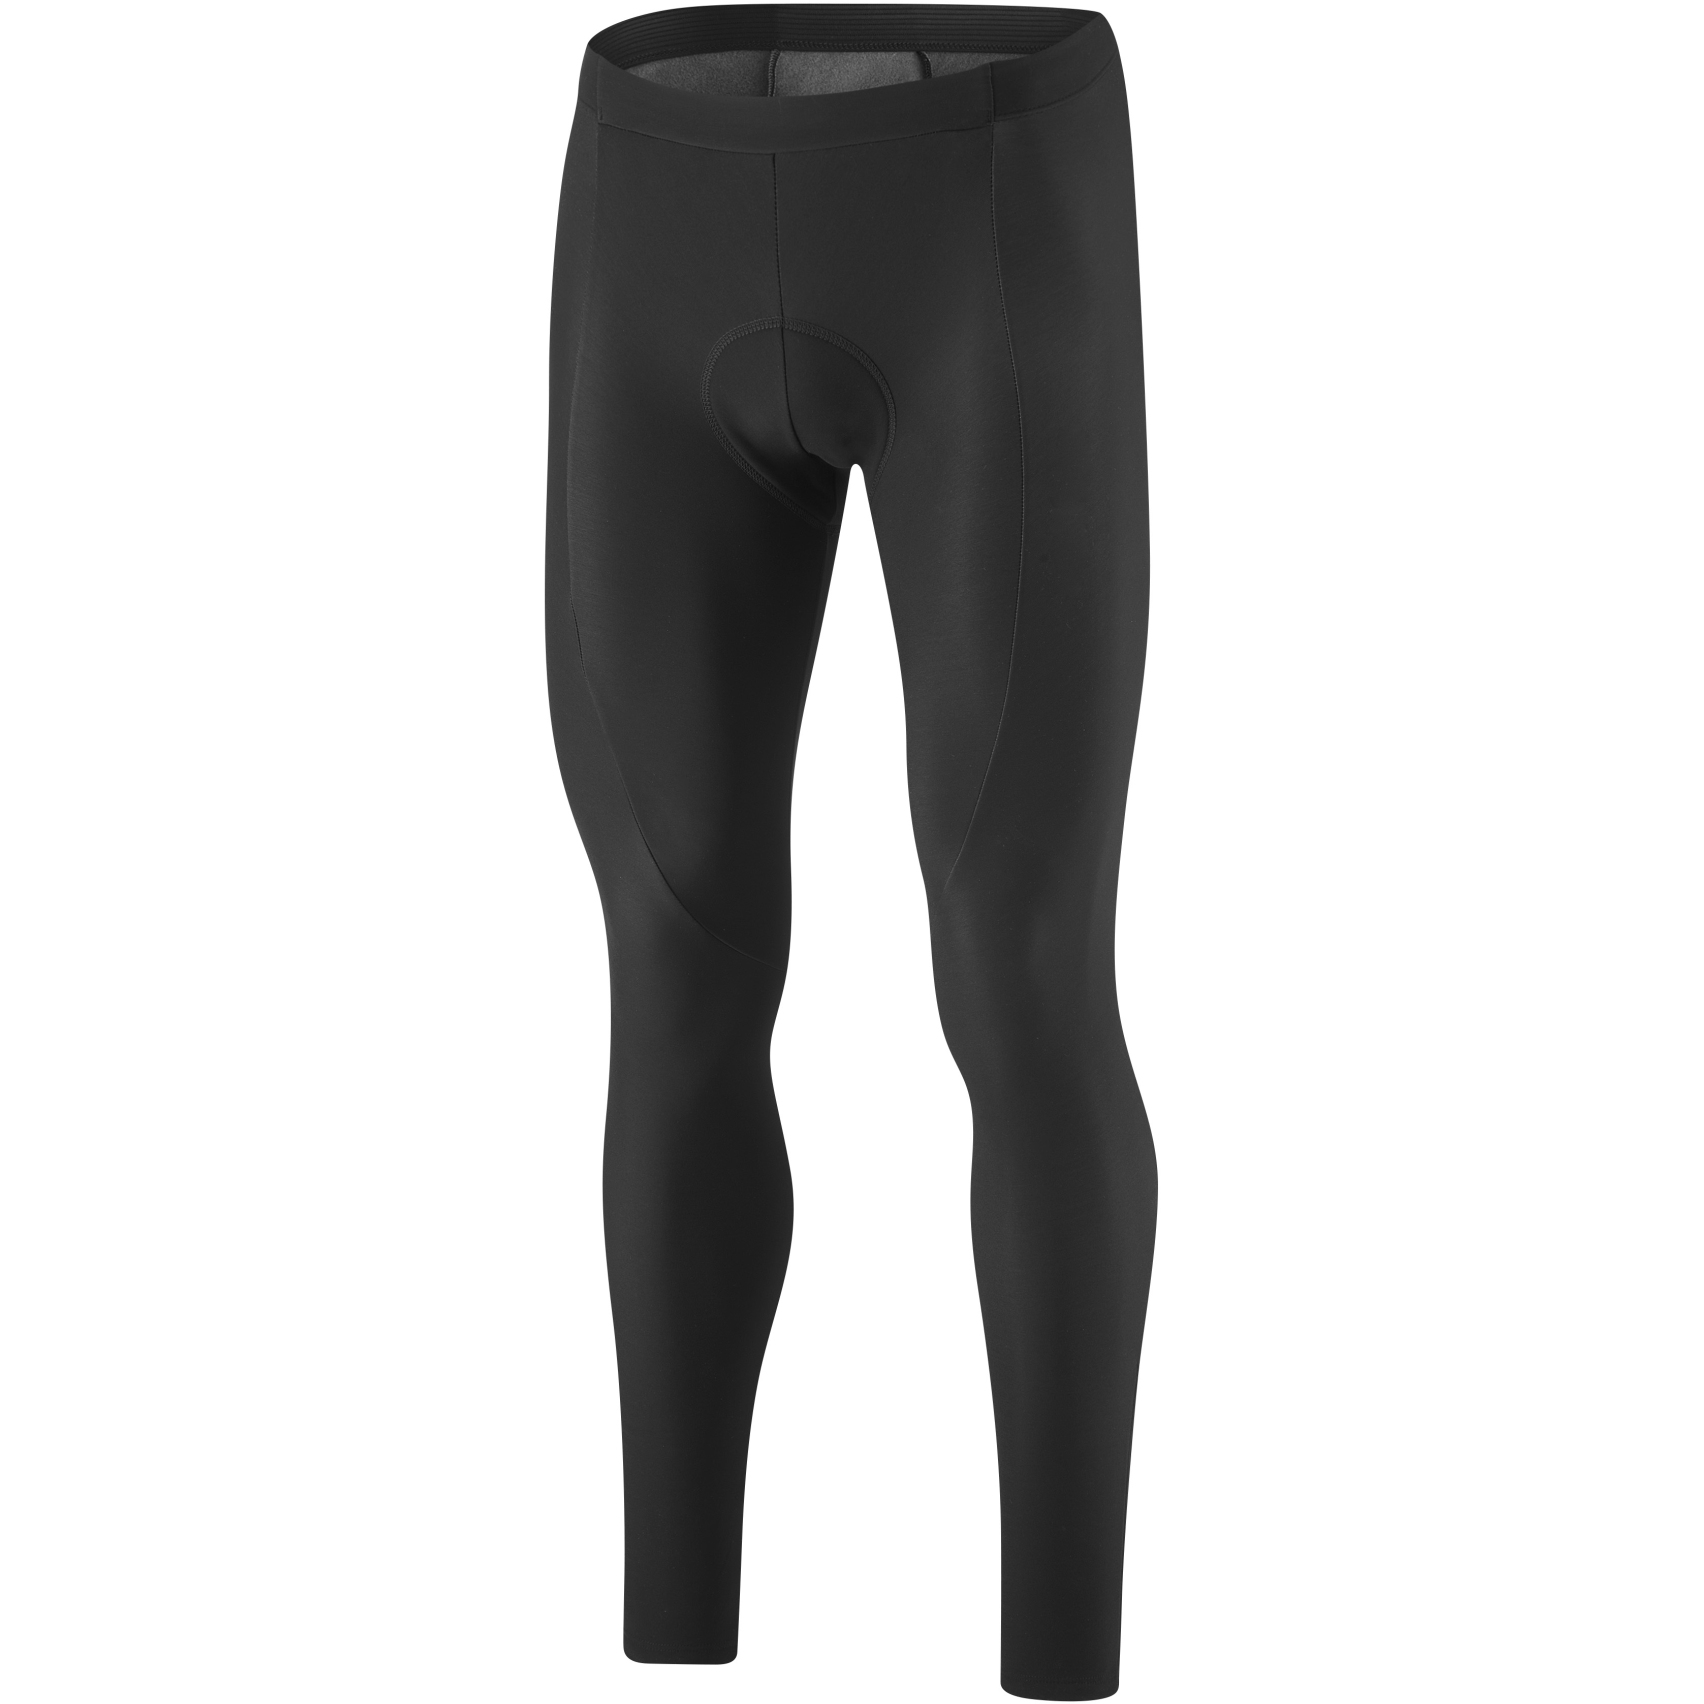 Image of Gonso SITIVO Blue Tights Men - Black